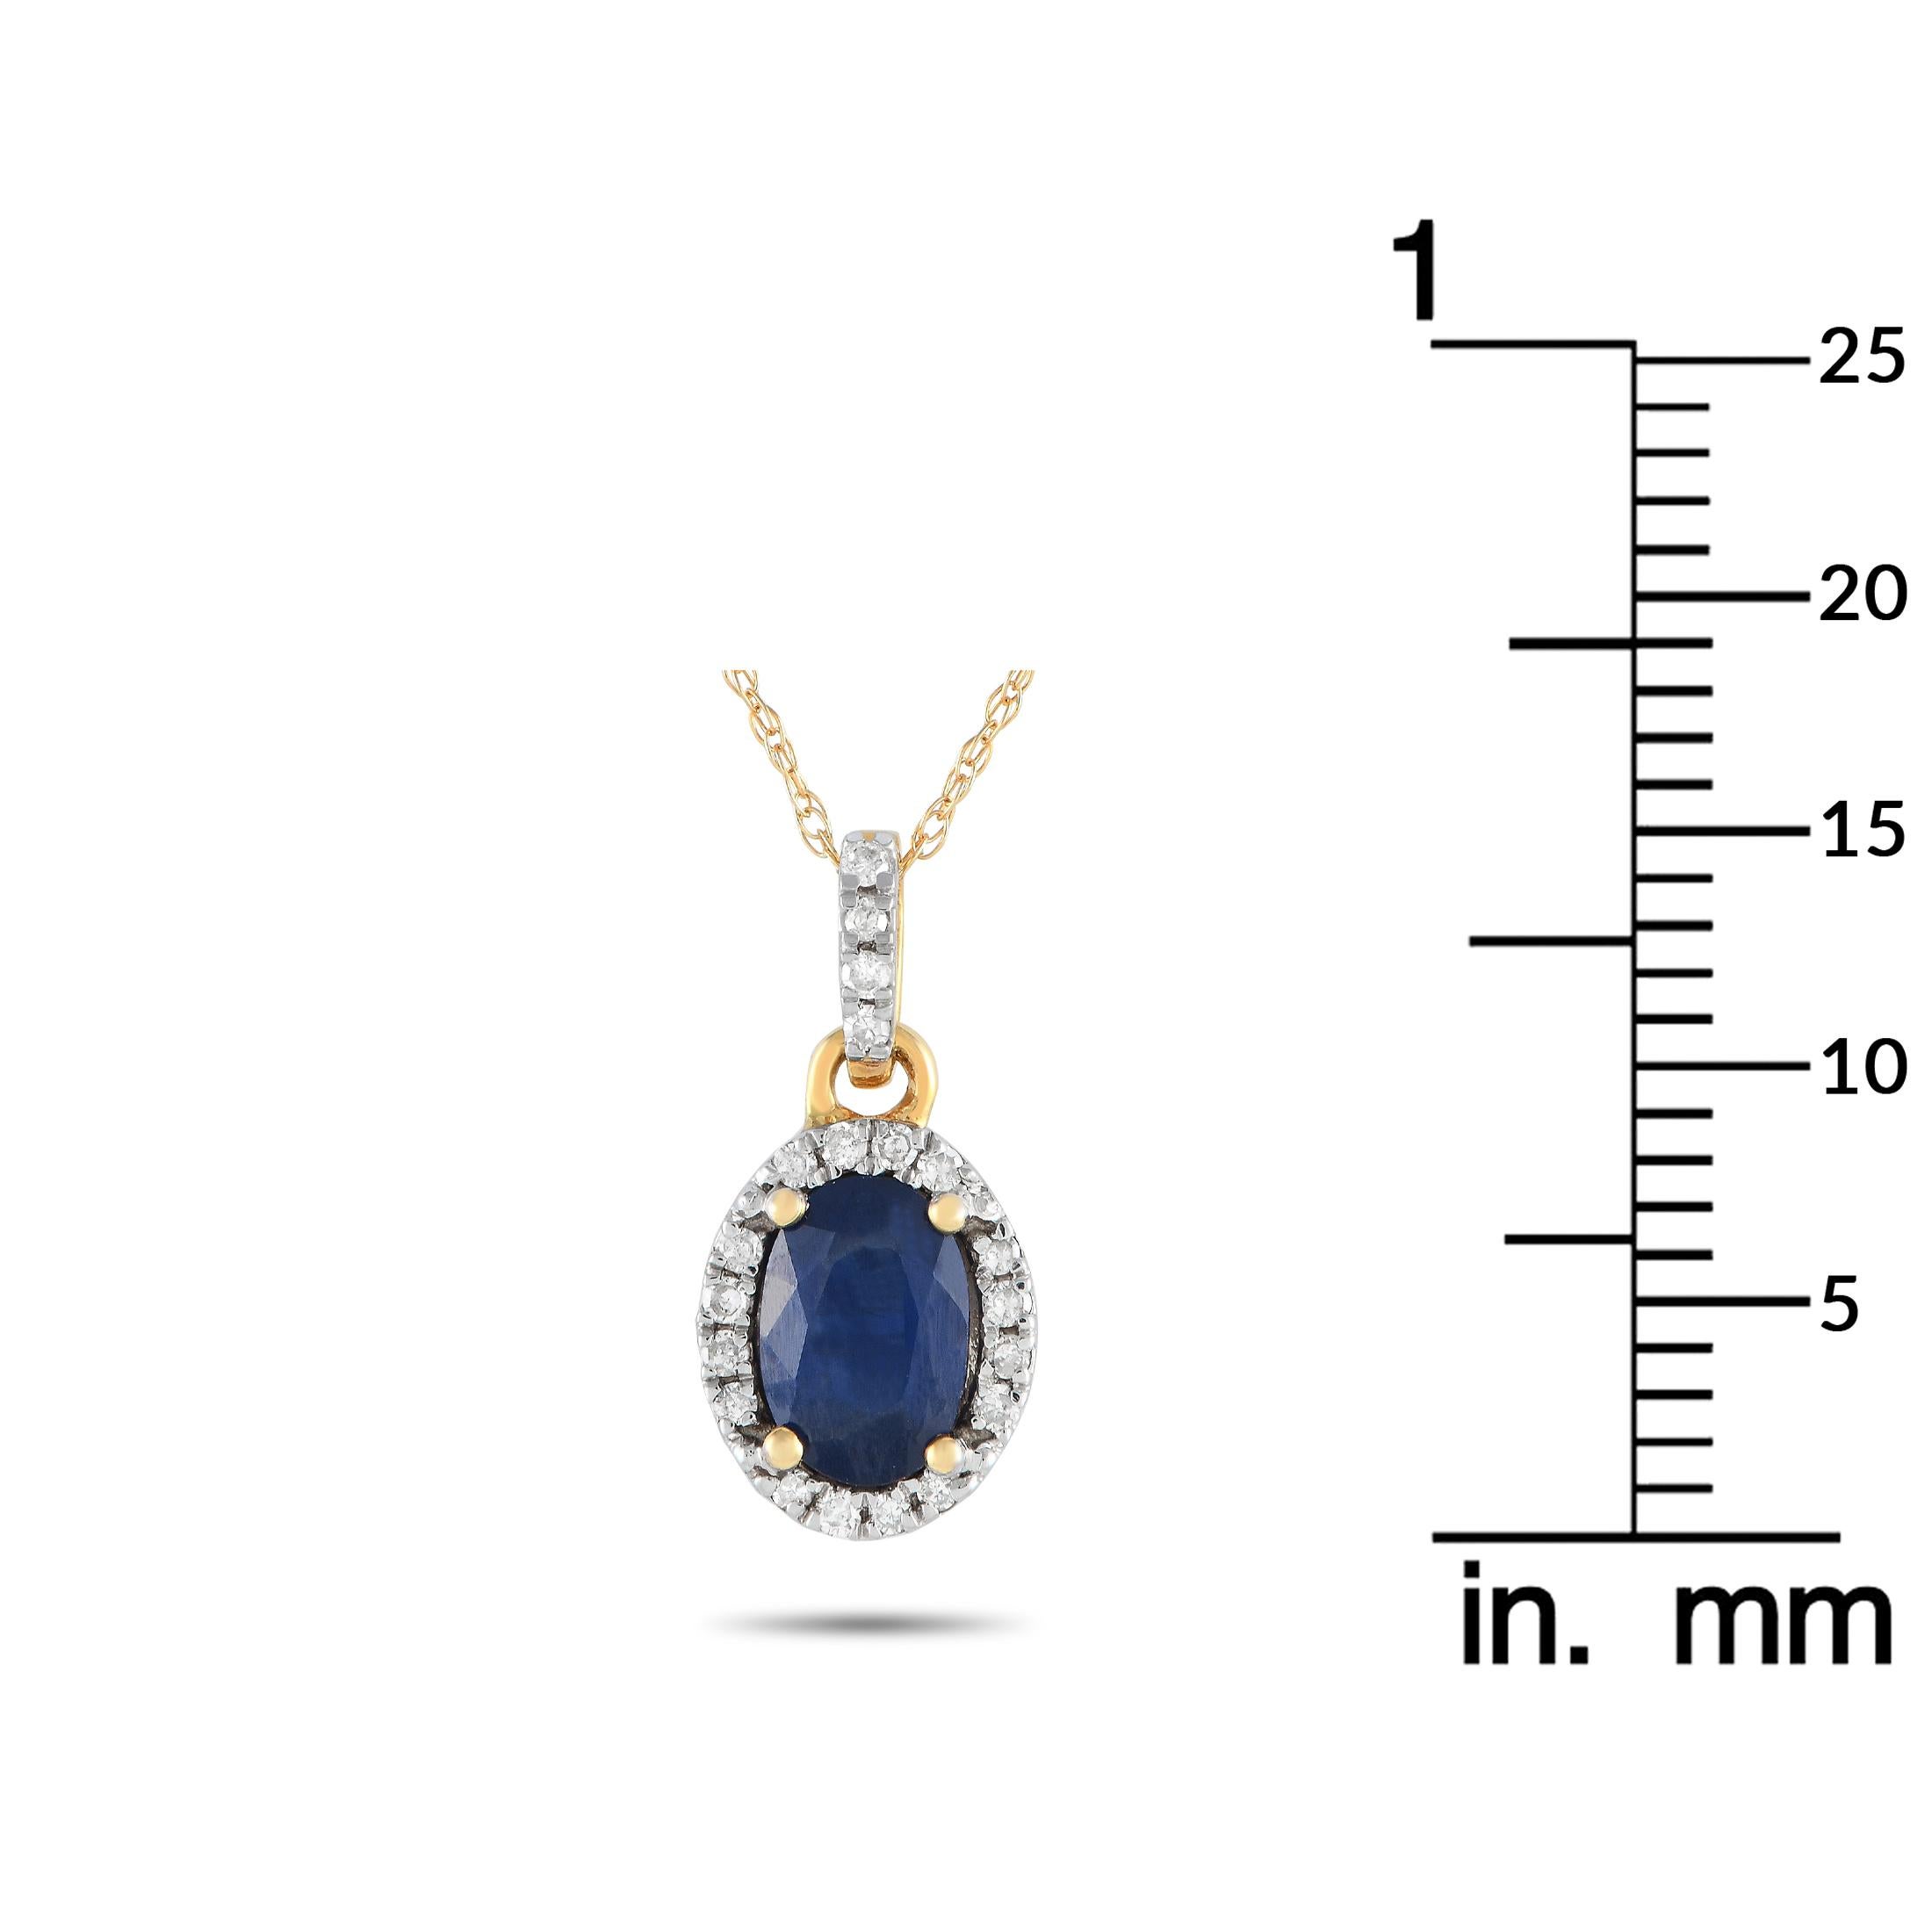 LB Exclusive 14K Yellow Gold 0.10ct Diamond Pendant Necklace PD4-16075YSA In New Condition For Sale In Southampton, PA